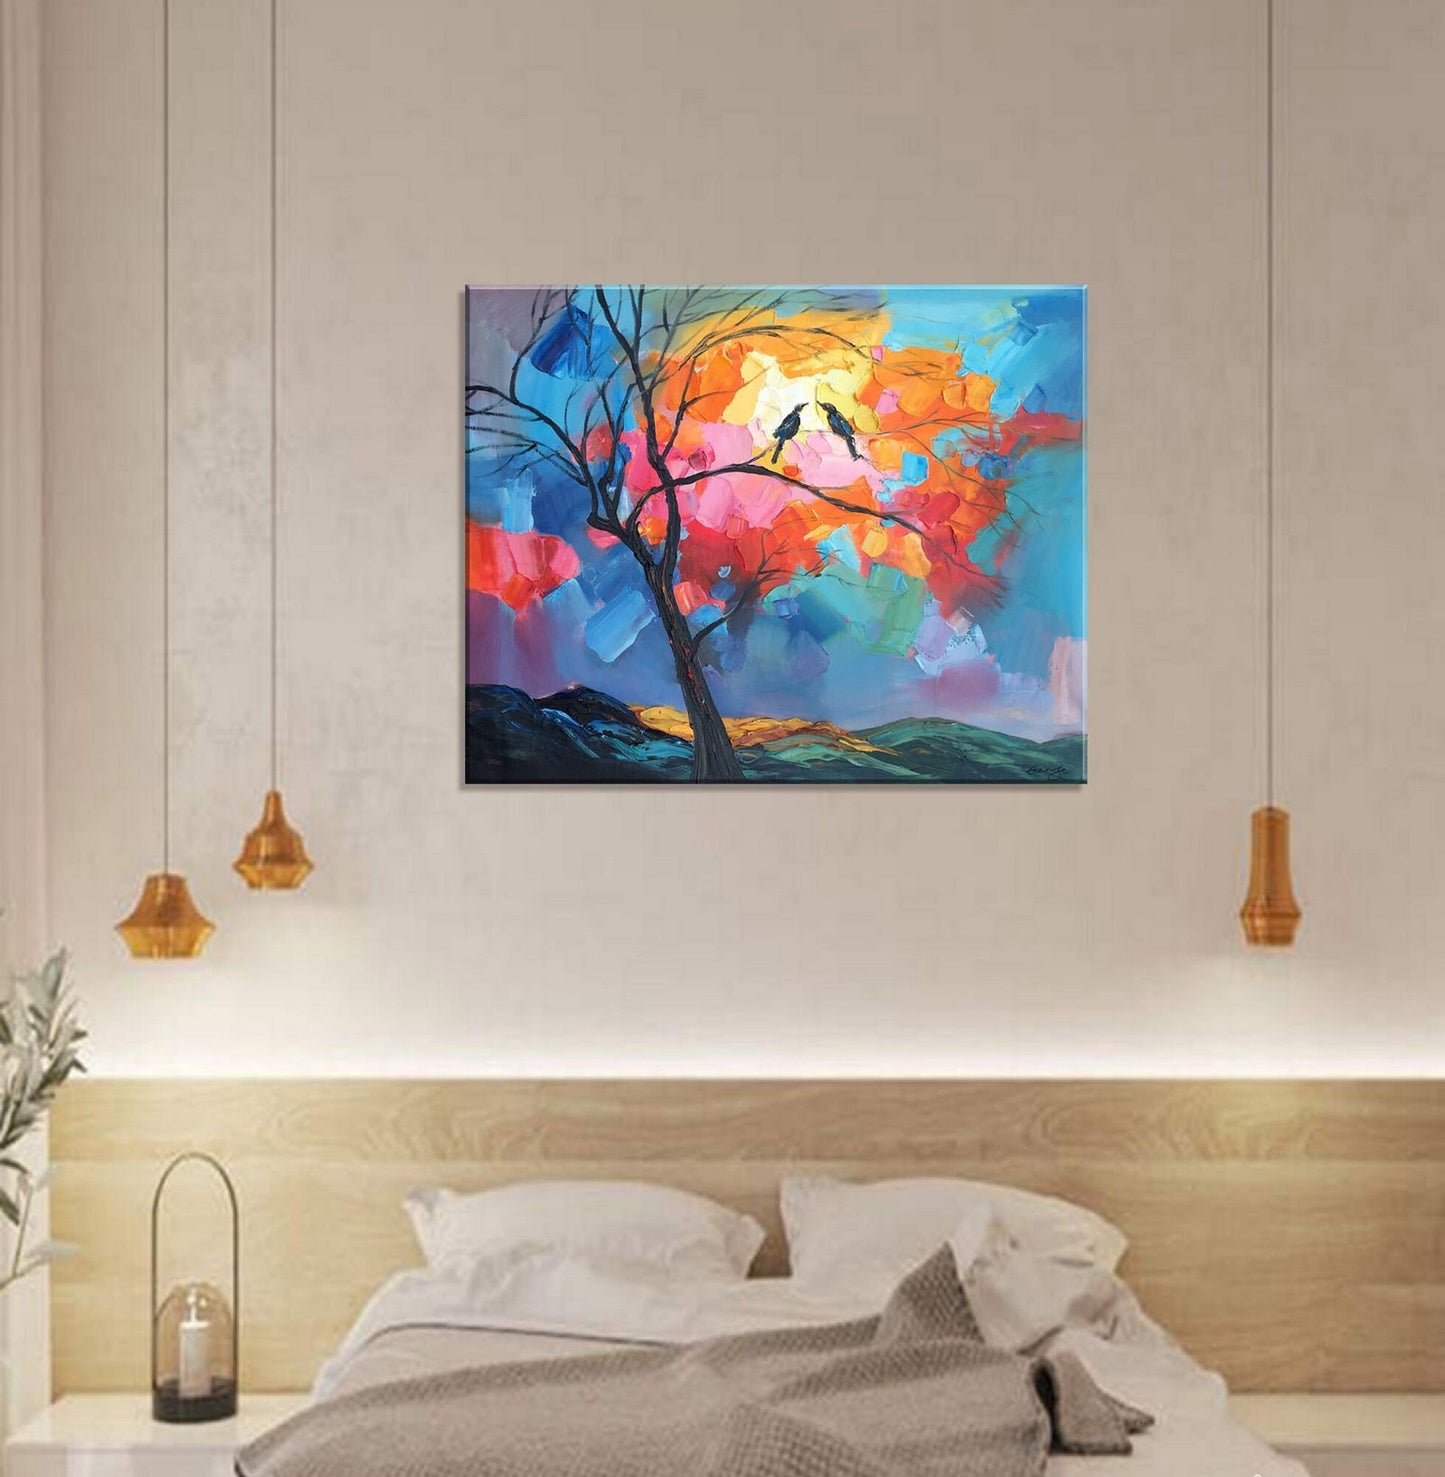 Extra Large Painting, Oil Painting, Love Birds,Wedding Gift, Original Painting, Large Canvas Wall Art, Large Abstract Painting, Abstract Art